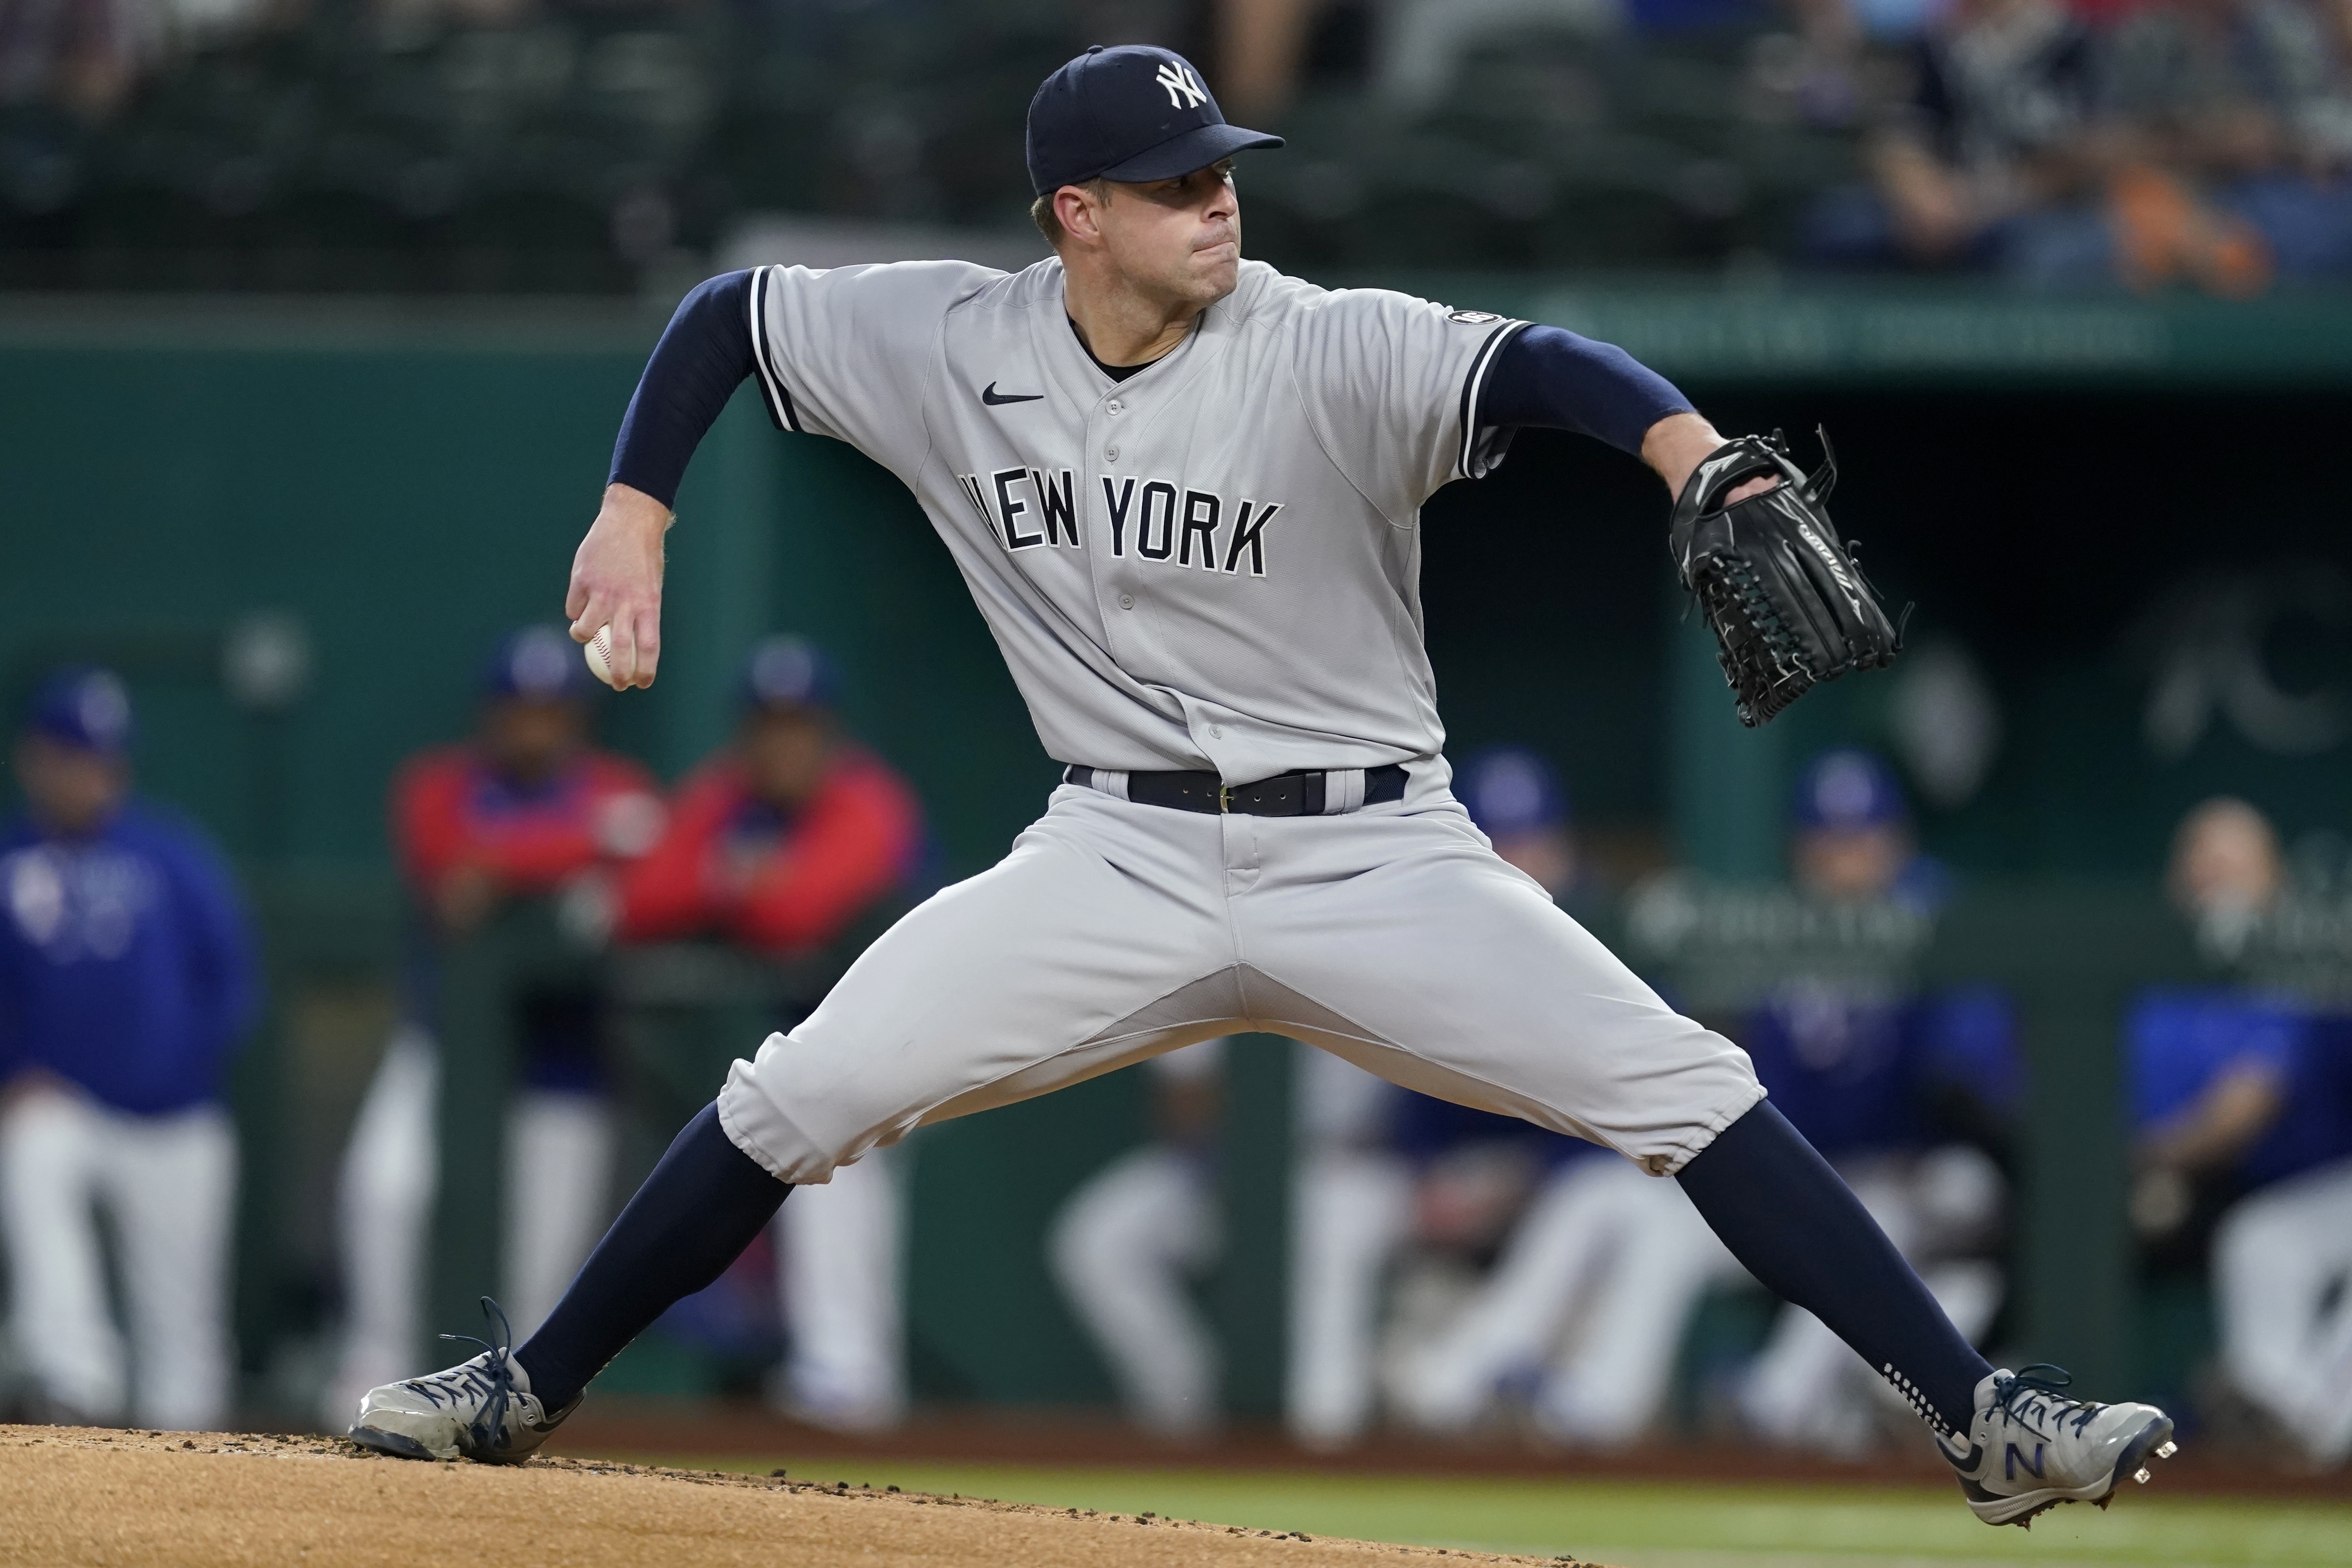 Corey Kluber pitches a no-hitter for the Yankees - Taipei Times